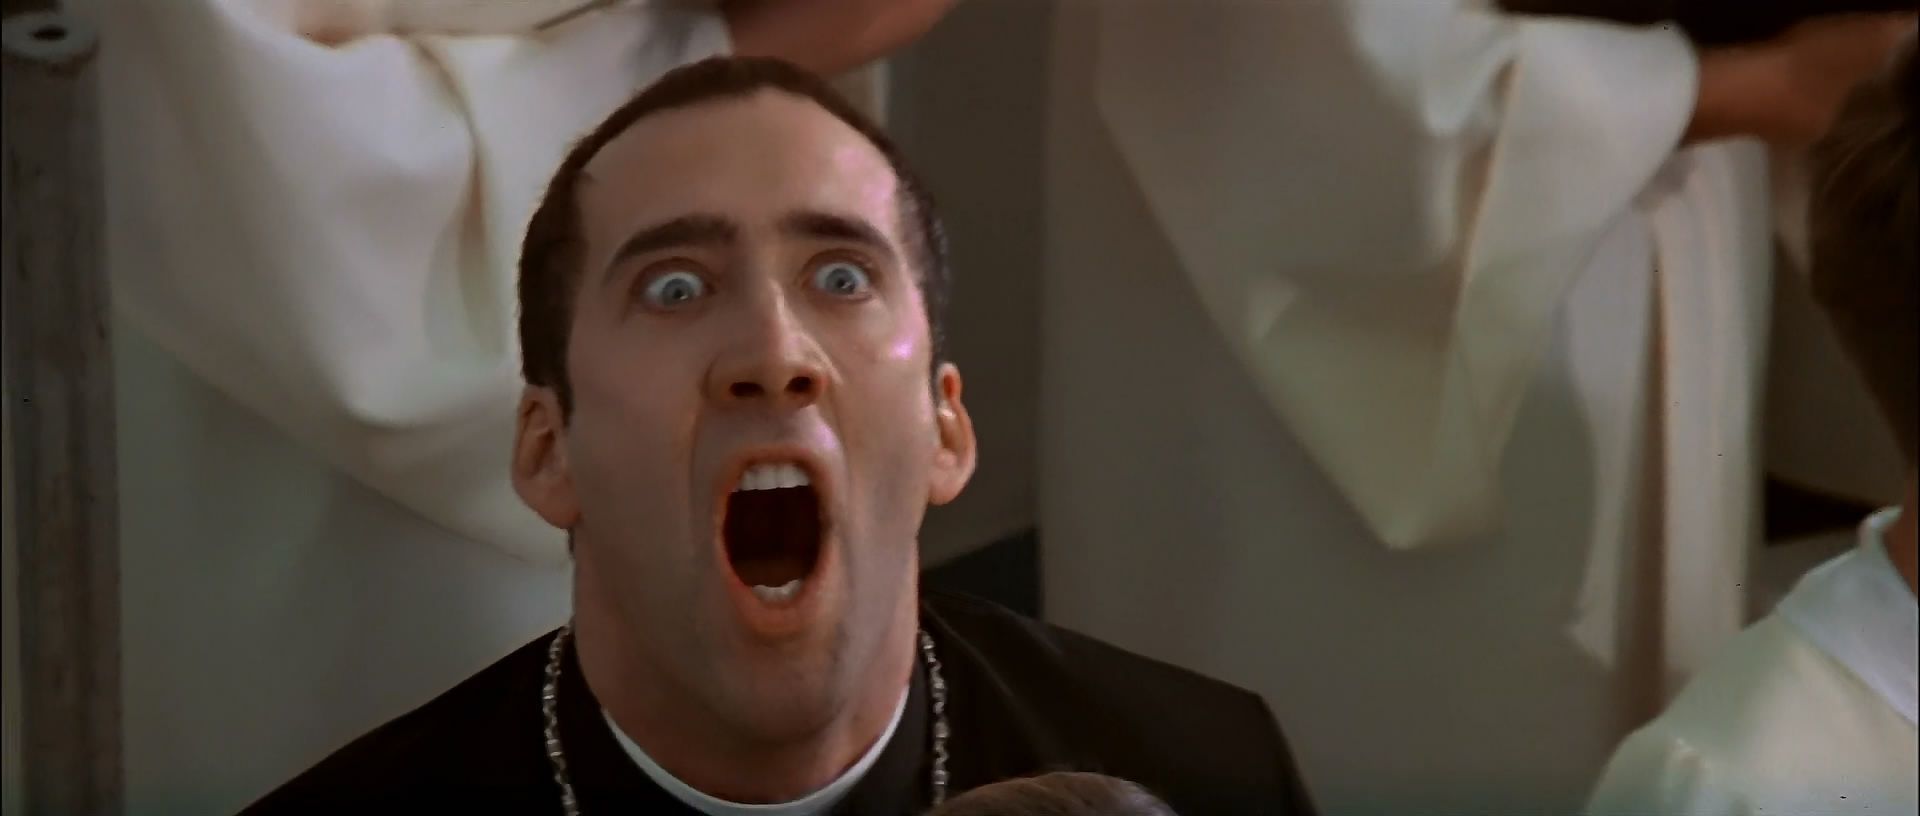 14 Nicolas Cage HD Wallpapers | Backgrounds - Wallpaper Abyss